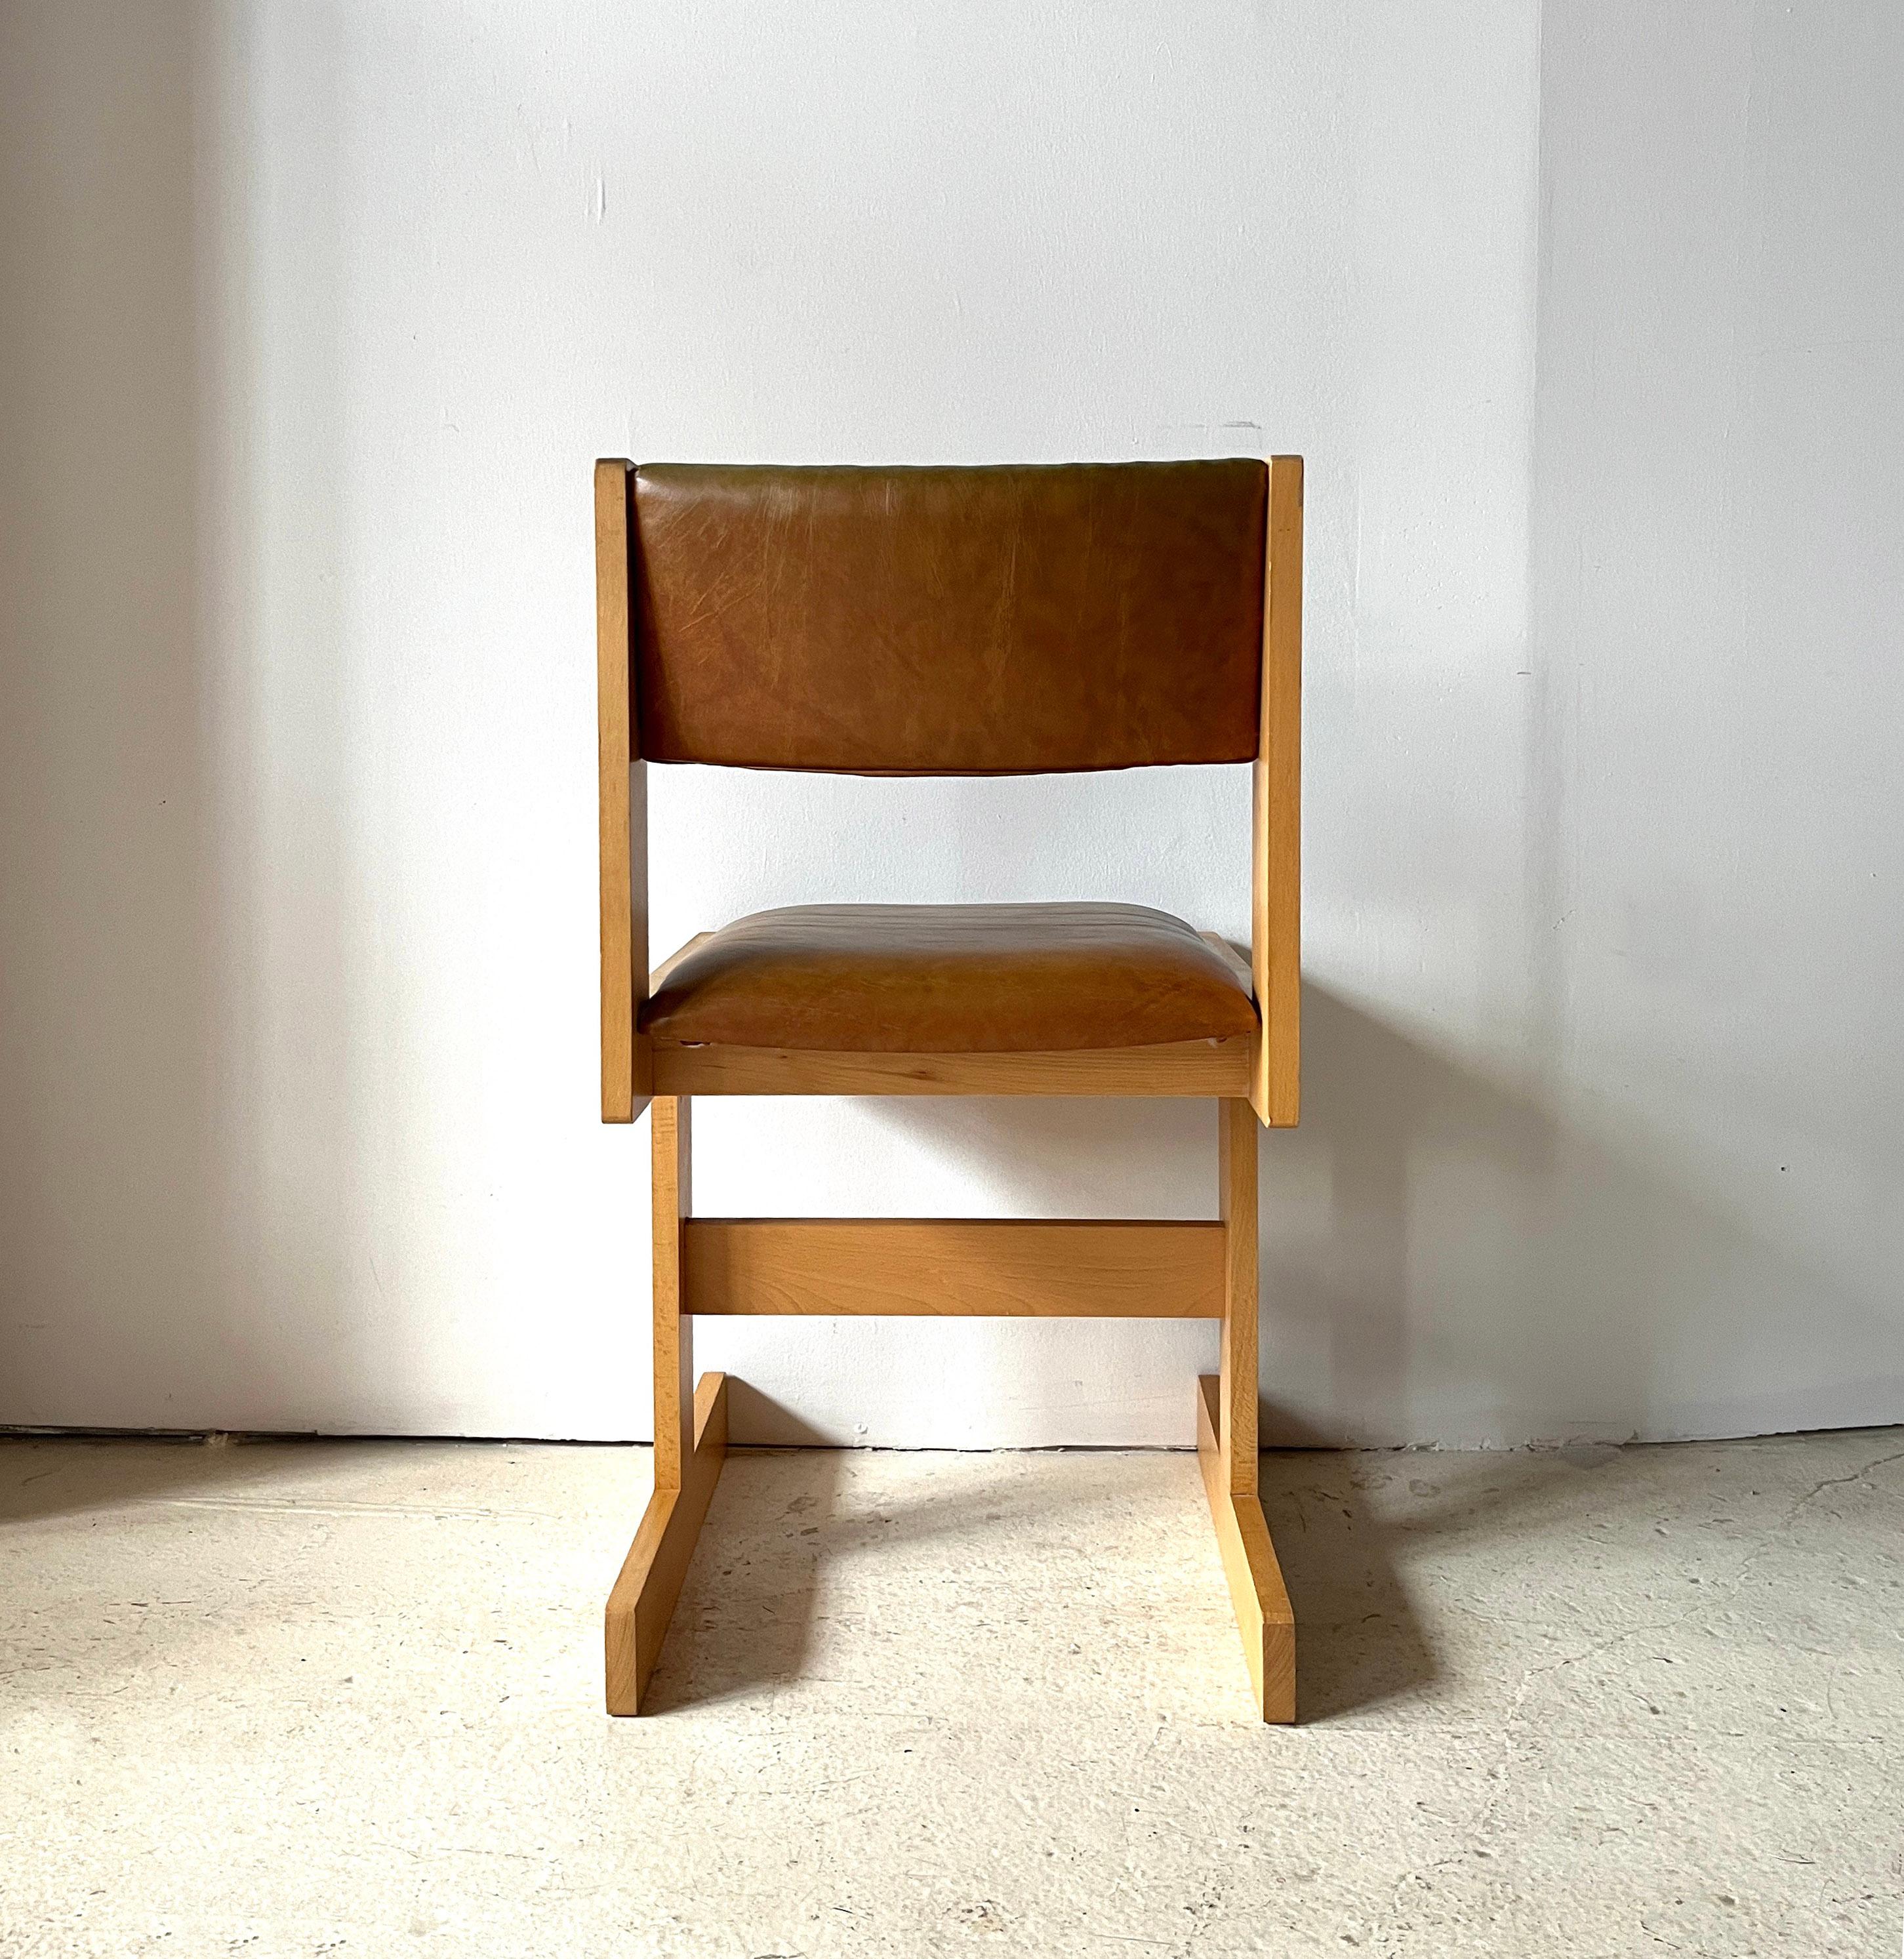 American Post-modern 1970s Wood Desk Chair by Chatham County Furniture, High Point For Sale